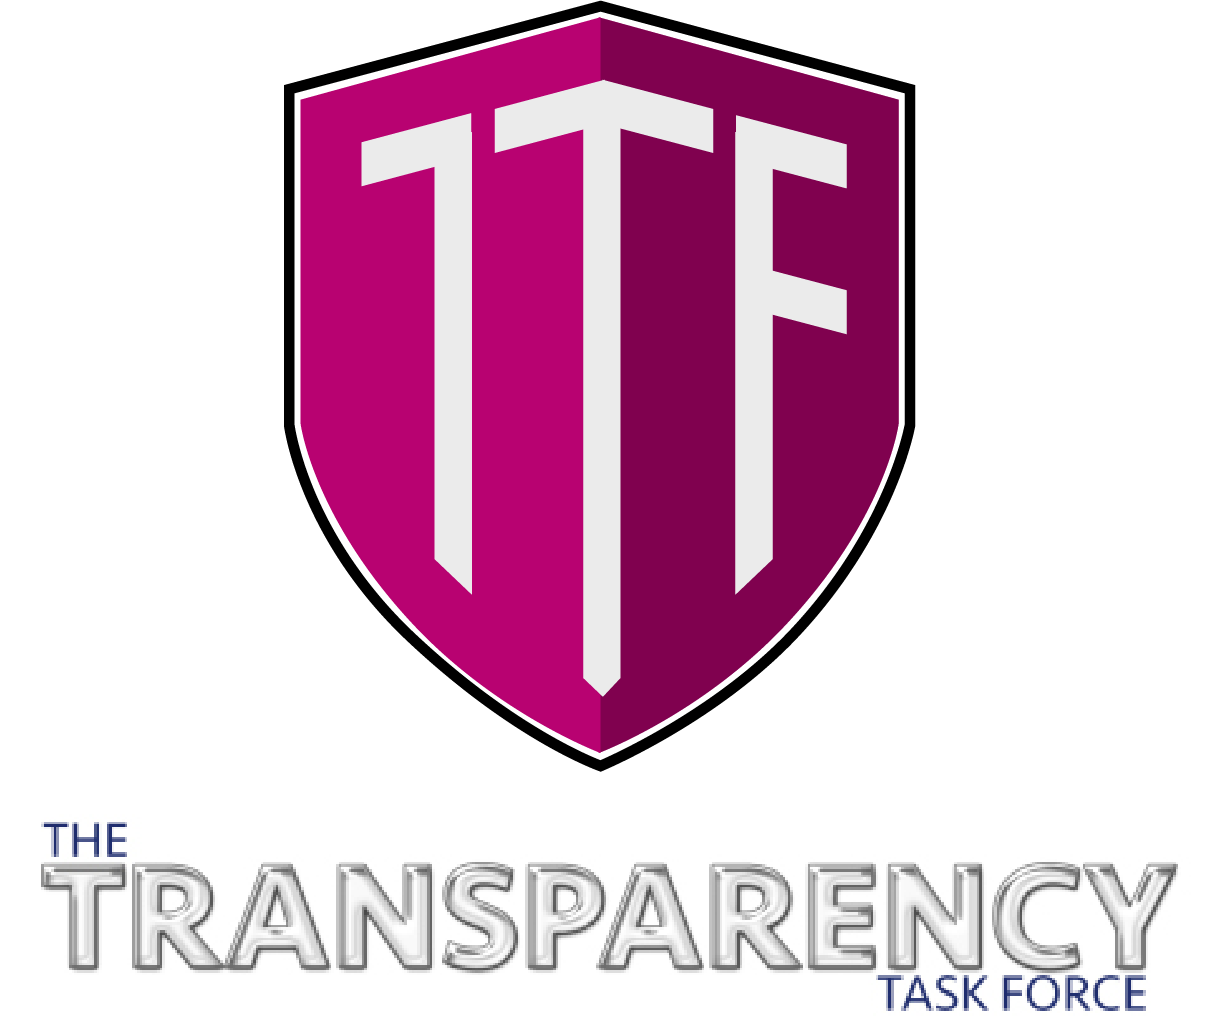 The Blackmore Bond Scandal; and why it really matters organized by The Transparency Task Force